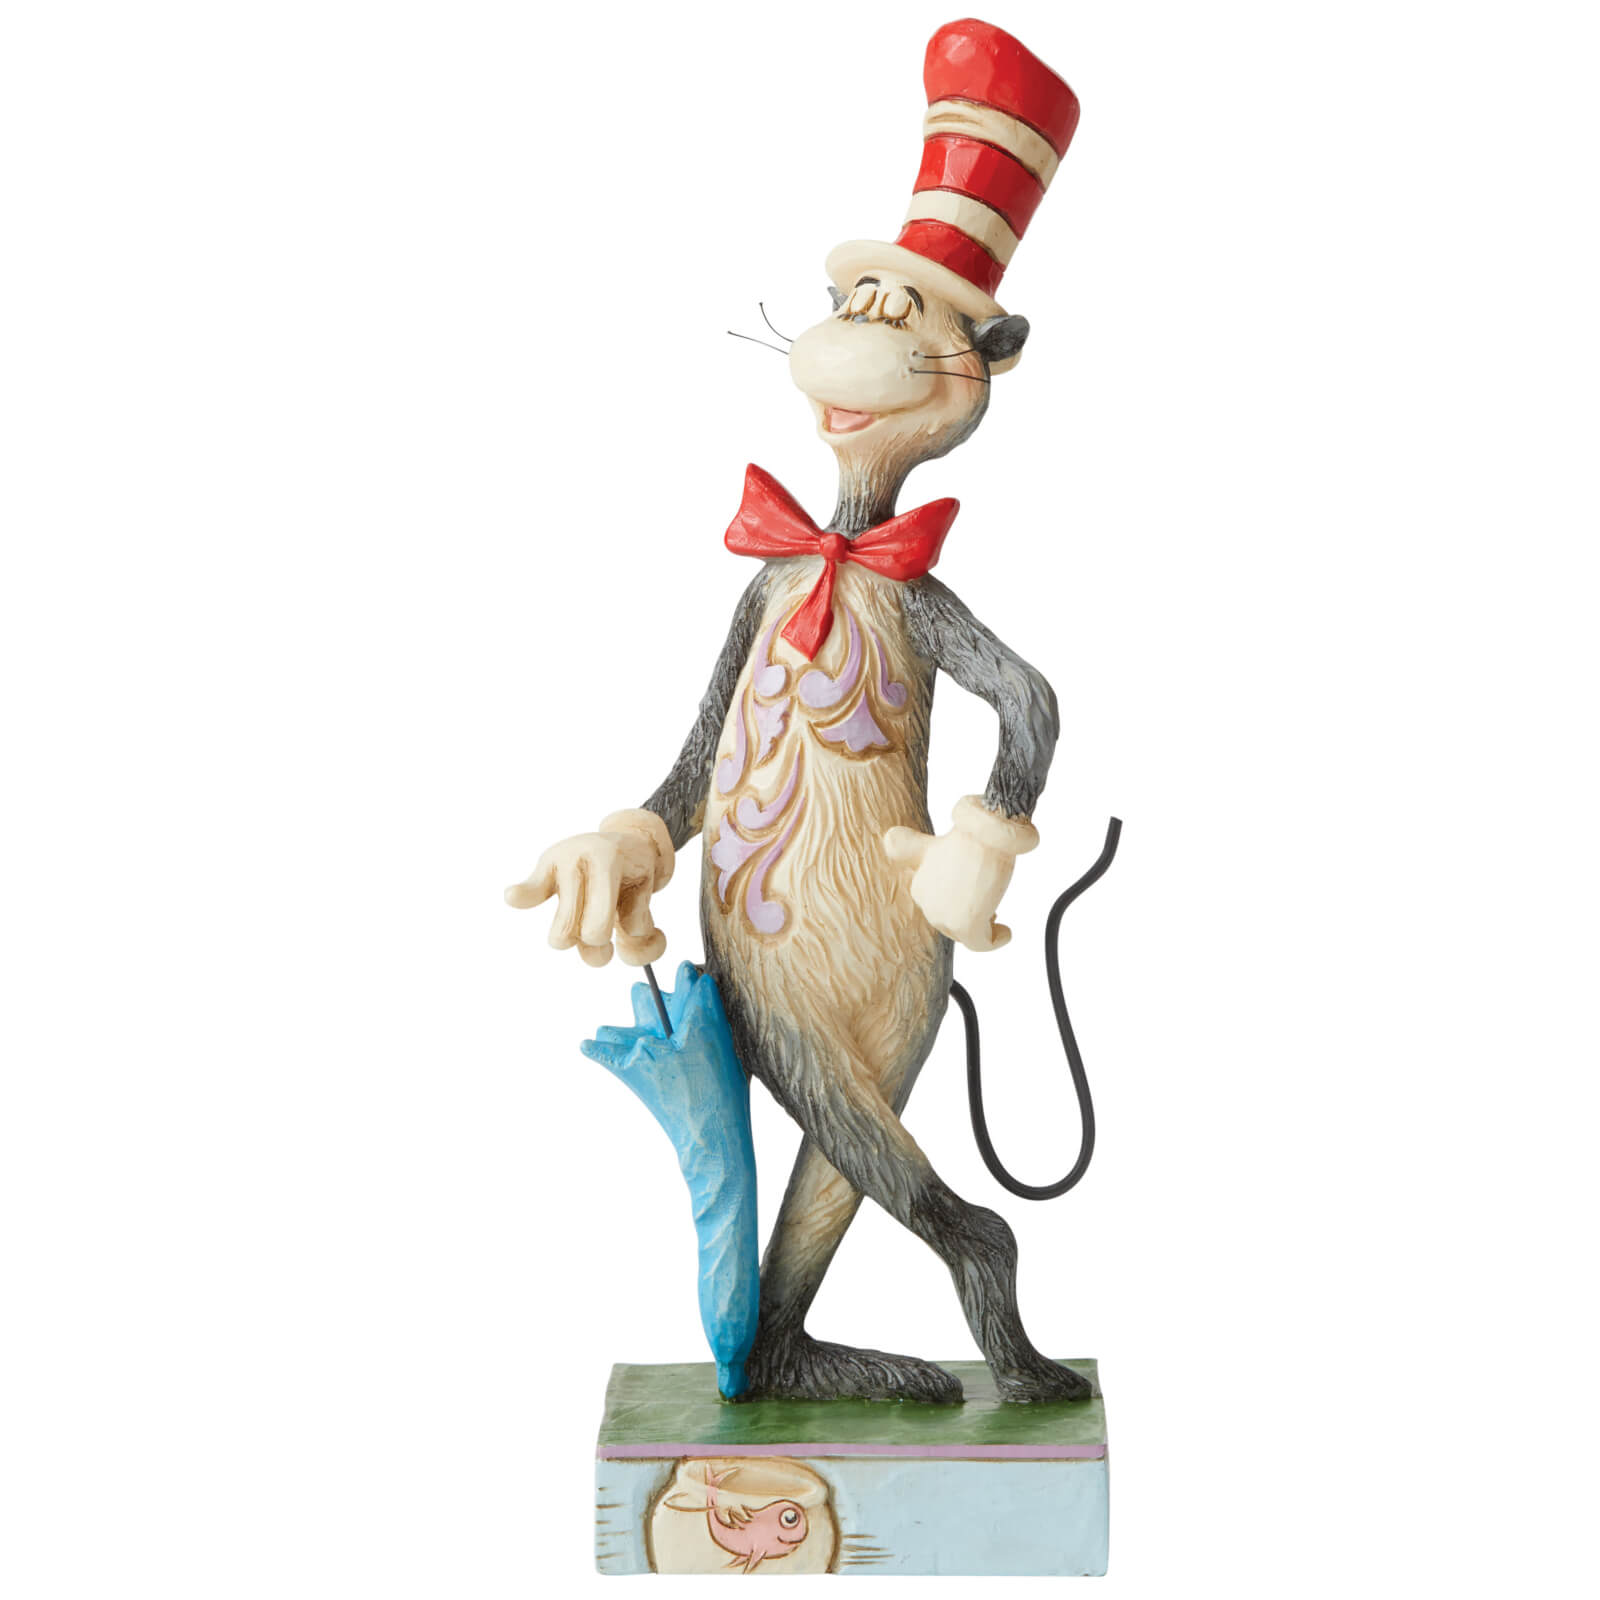 Enesco Dr Seuss by Jim Shore The Cat in the Hat with Umbrella Figurine